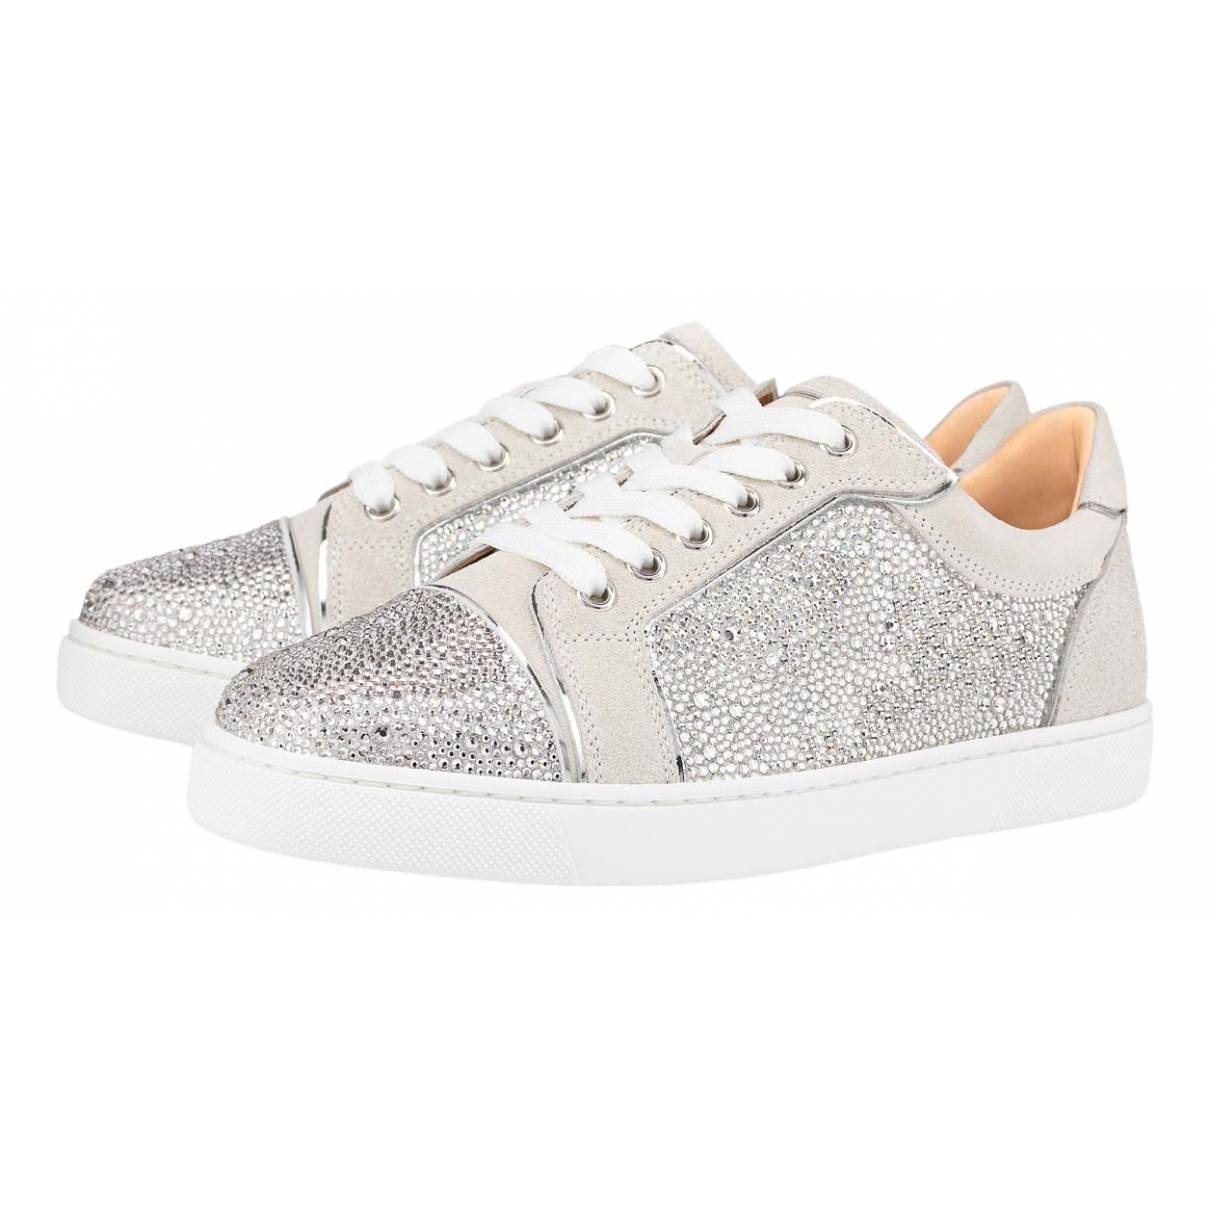 Trainers Christian Louboutin Silver size 36.5 EU in Suede - 25273017